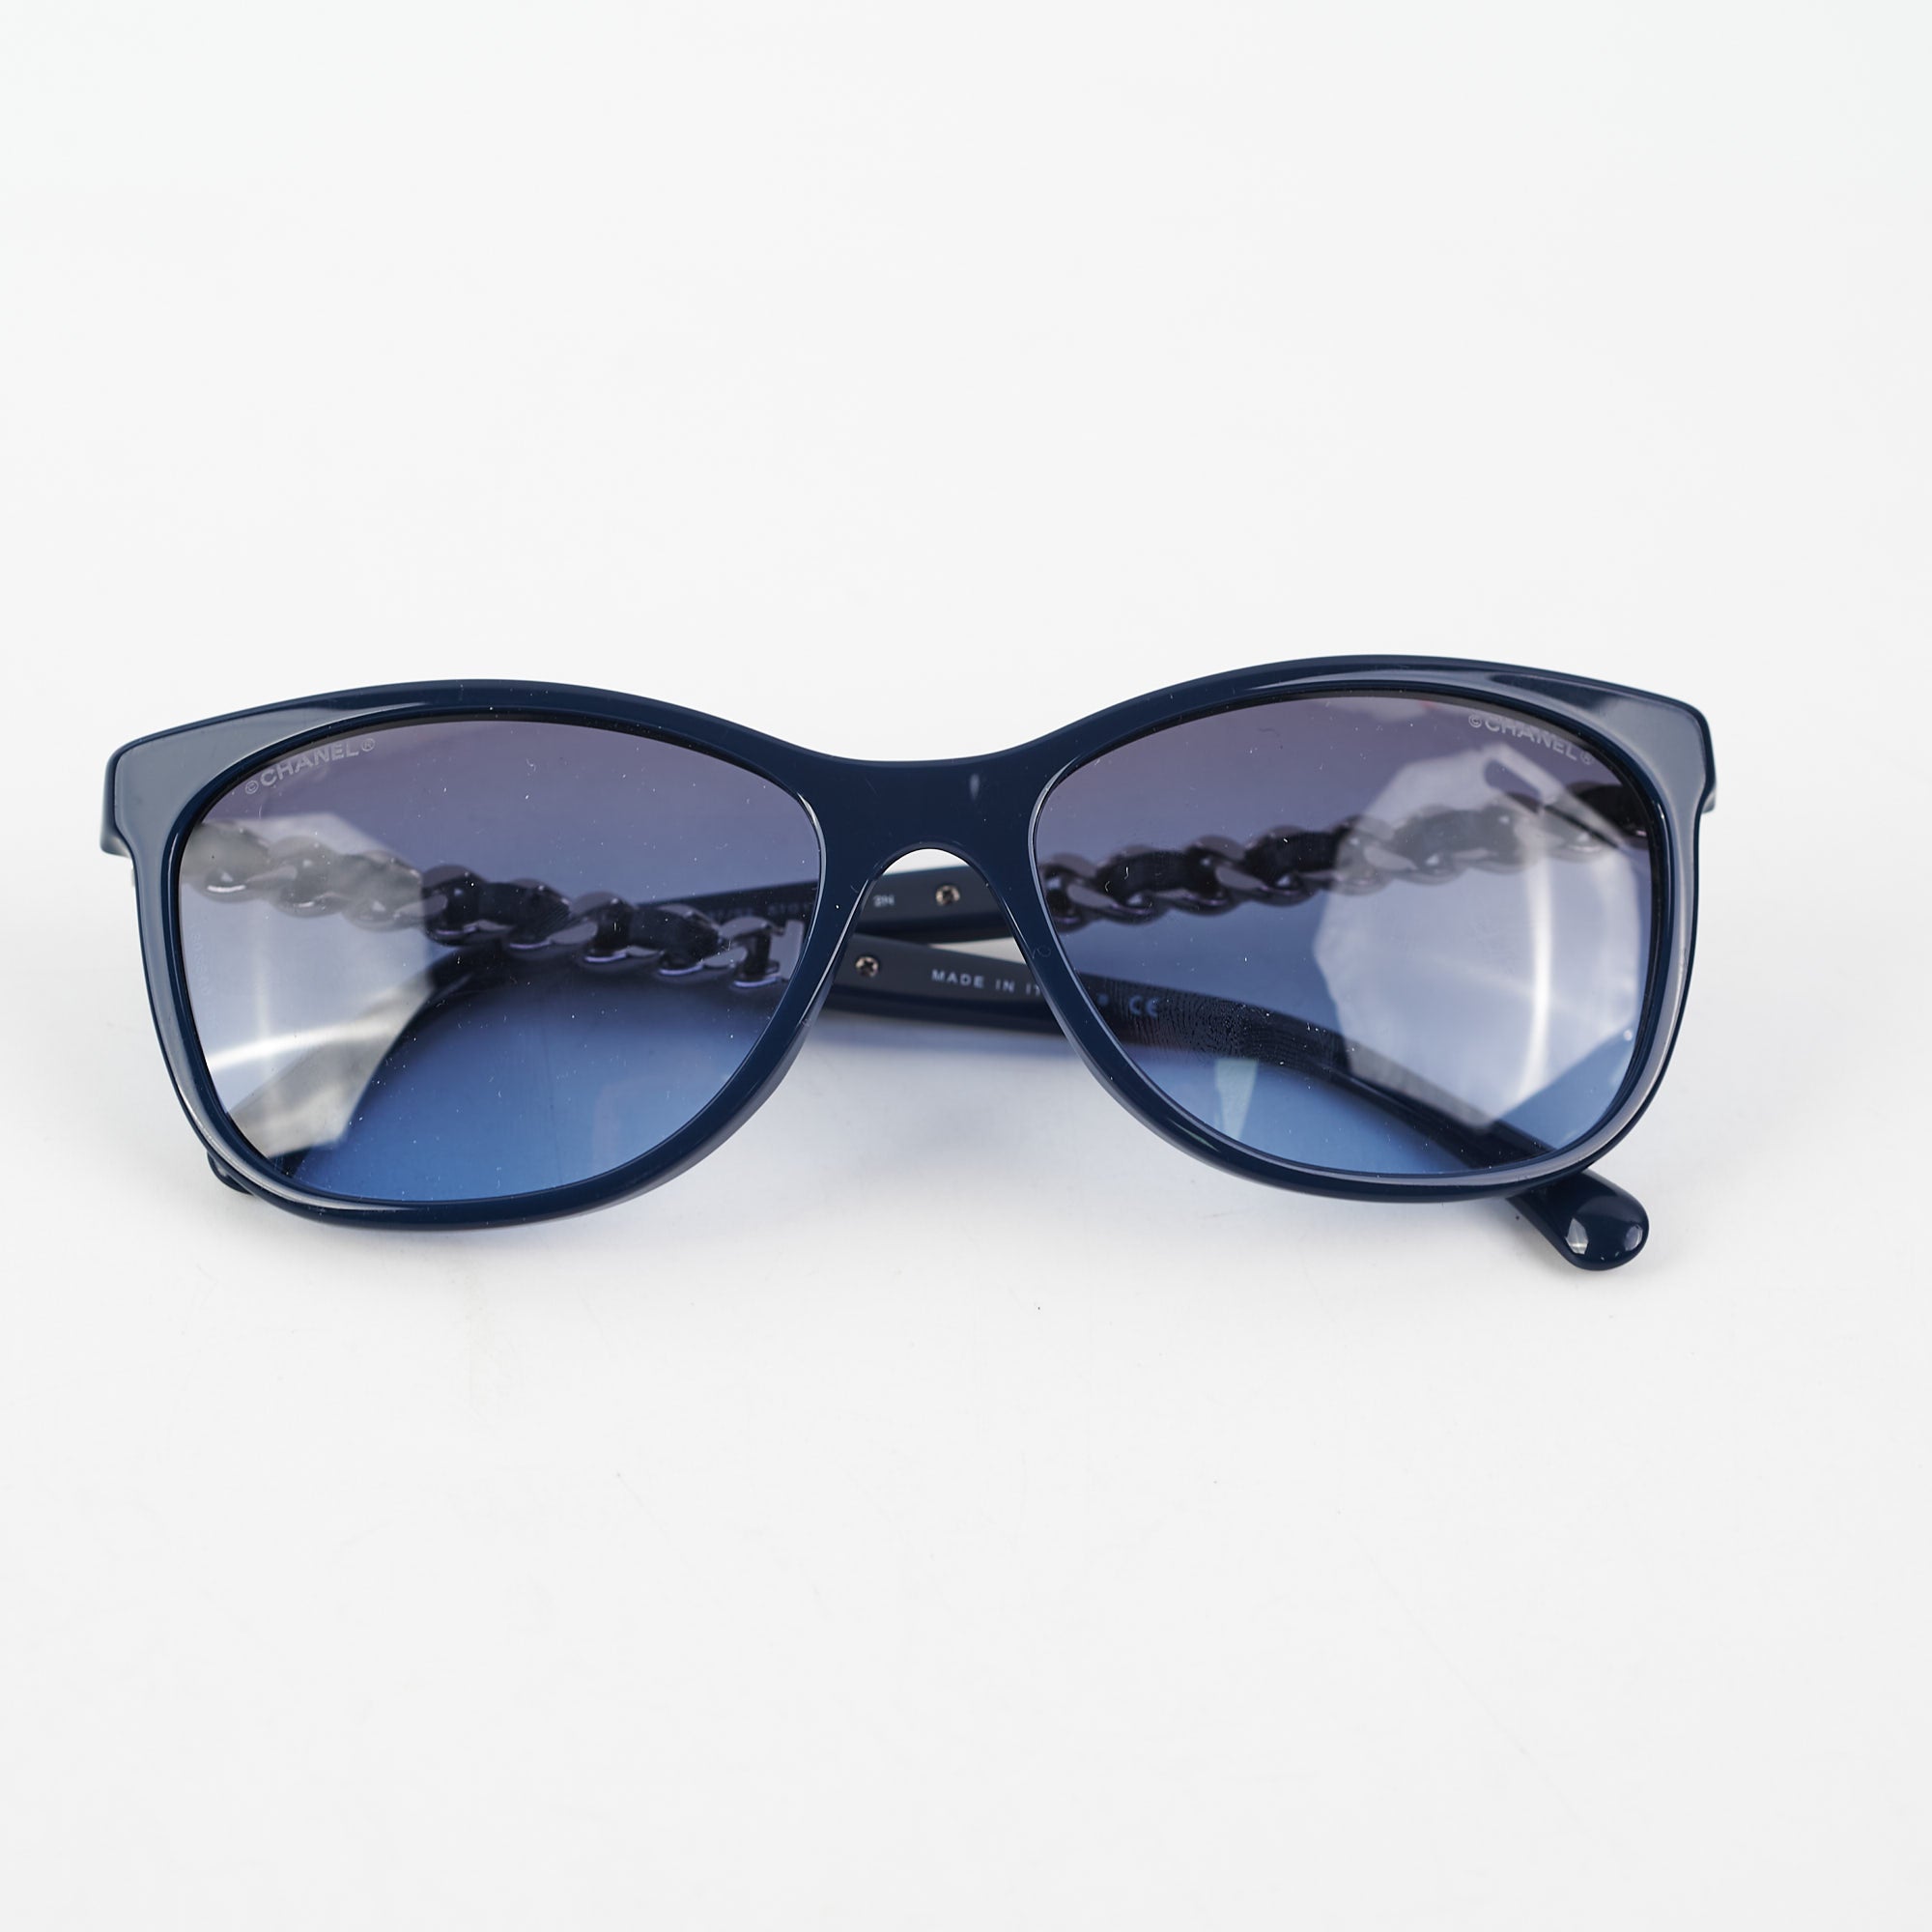 Chanel Sunglasses Butterfly Navy Blue 5313A Coco mark Sz 5618 Excellent   eBay